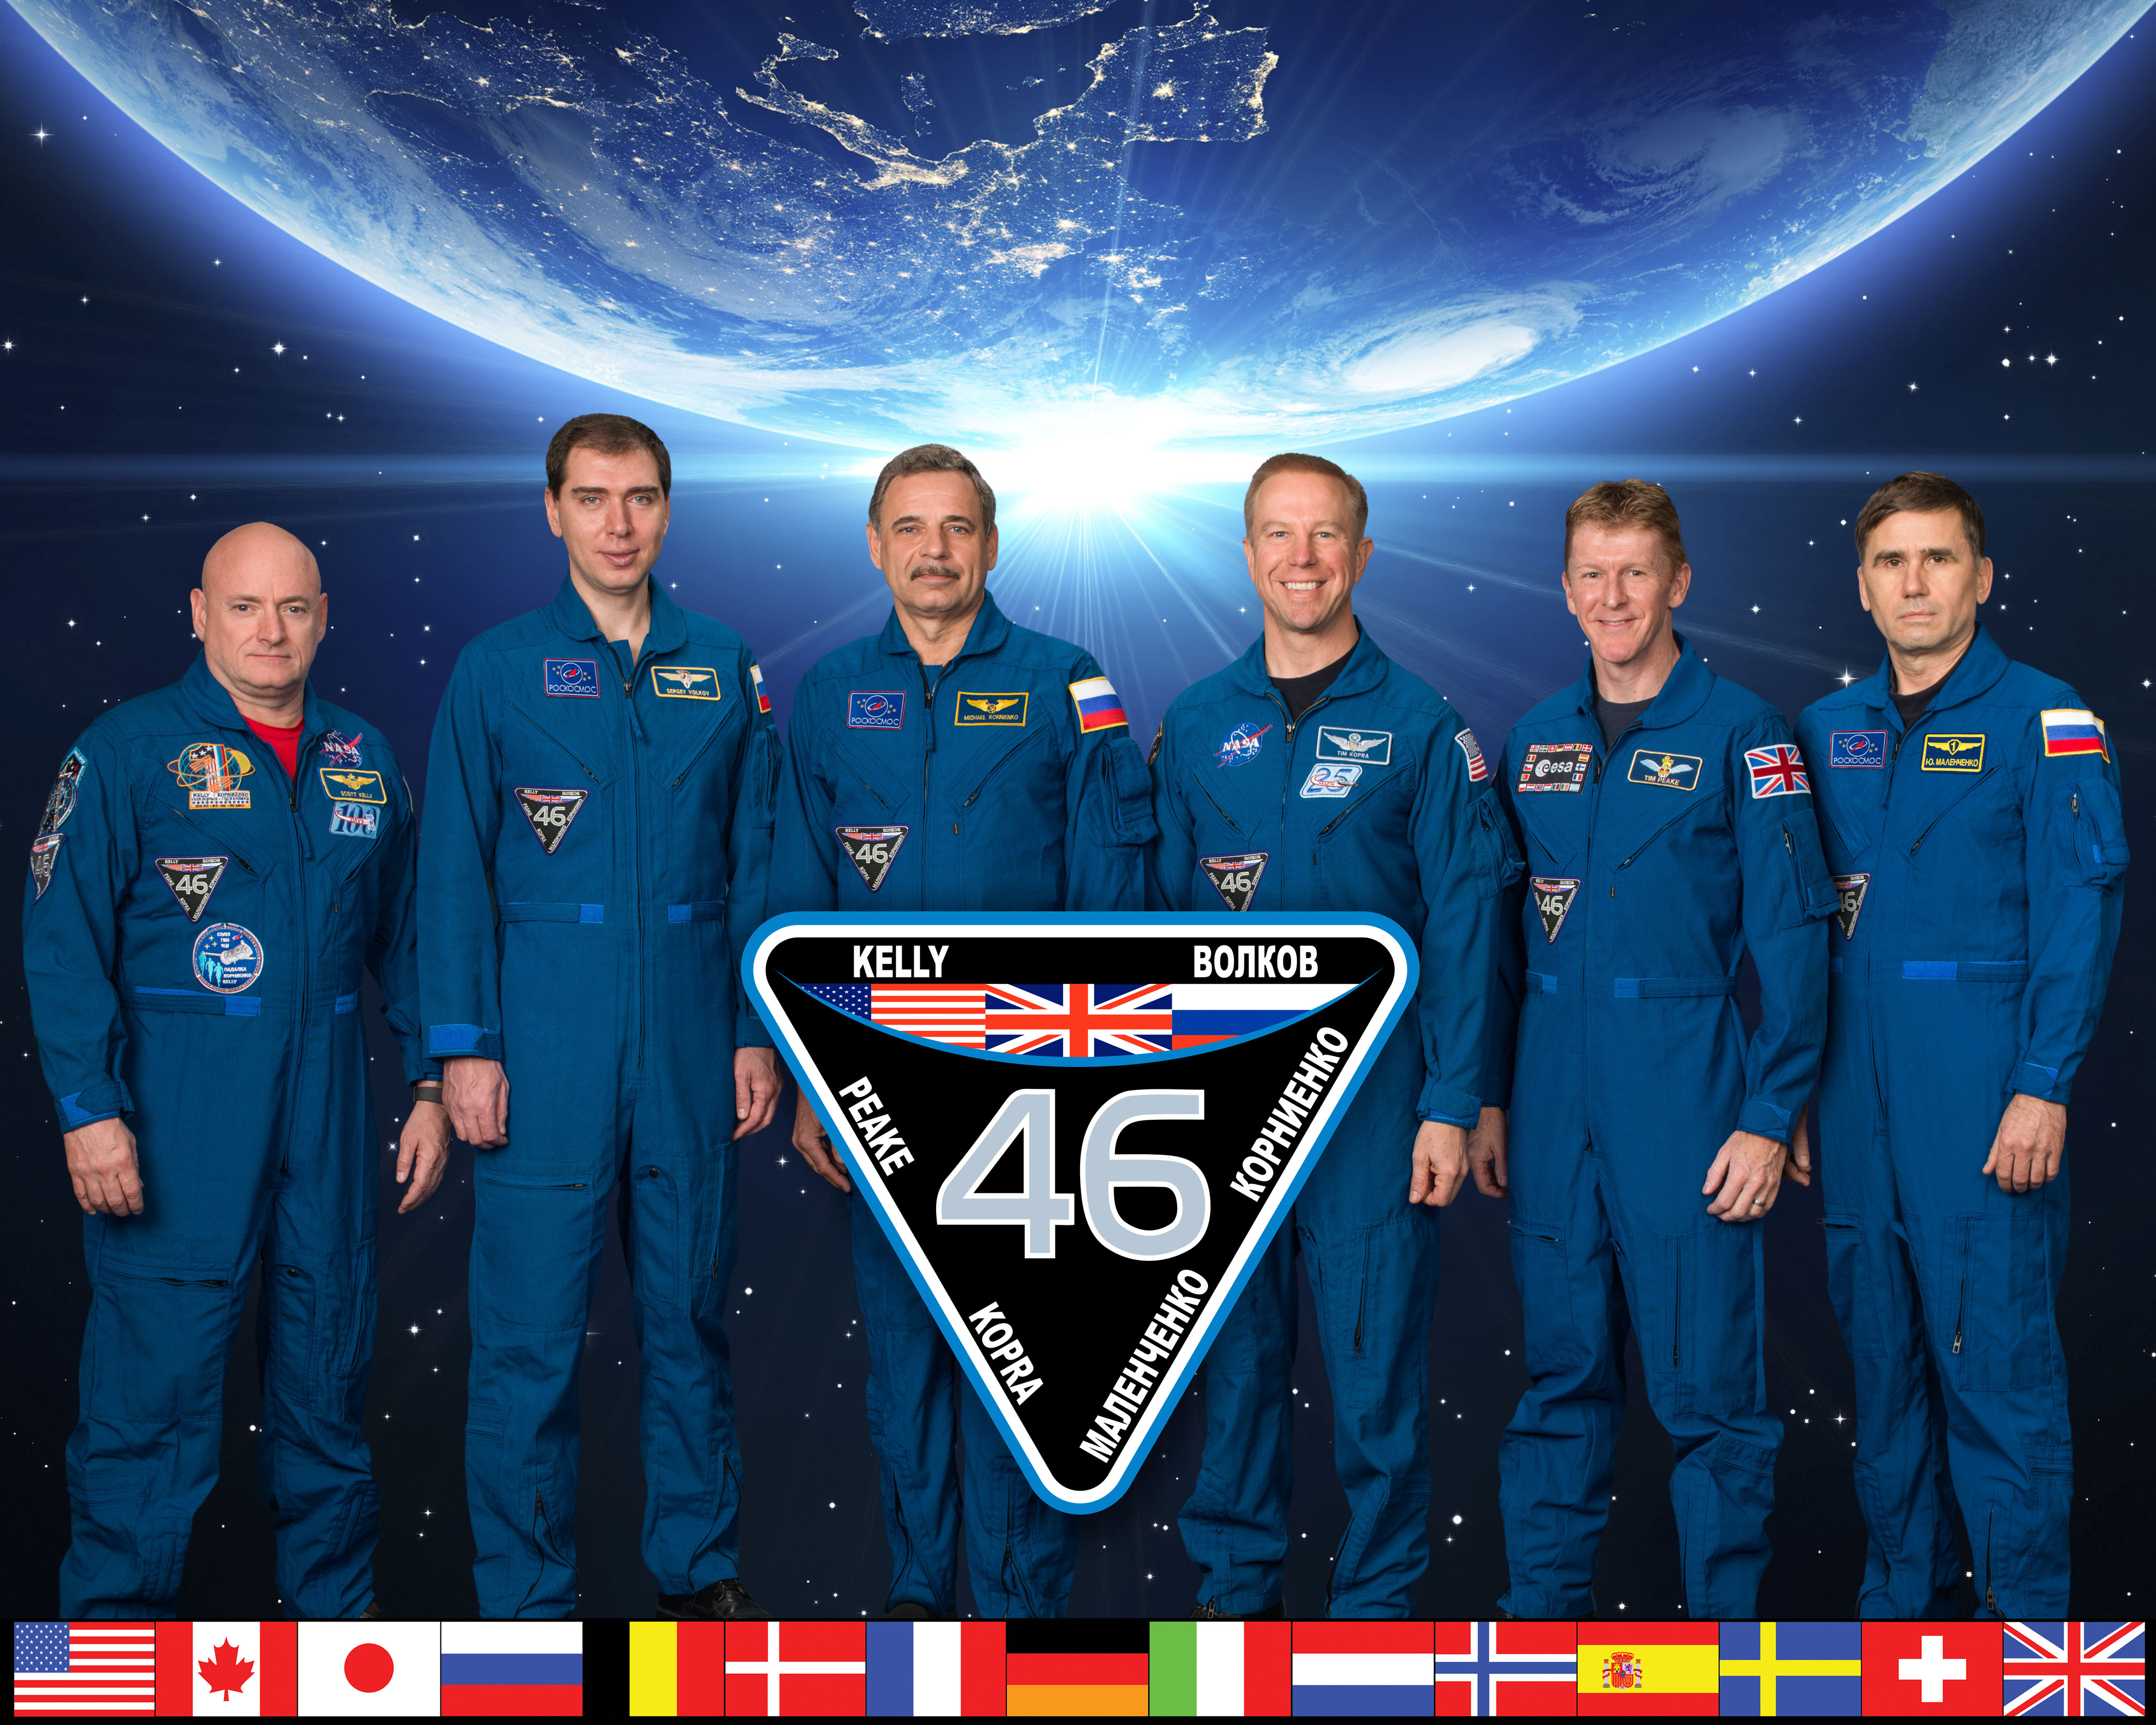 Expedition 46 Official Crew Portrait